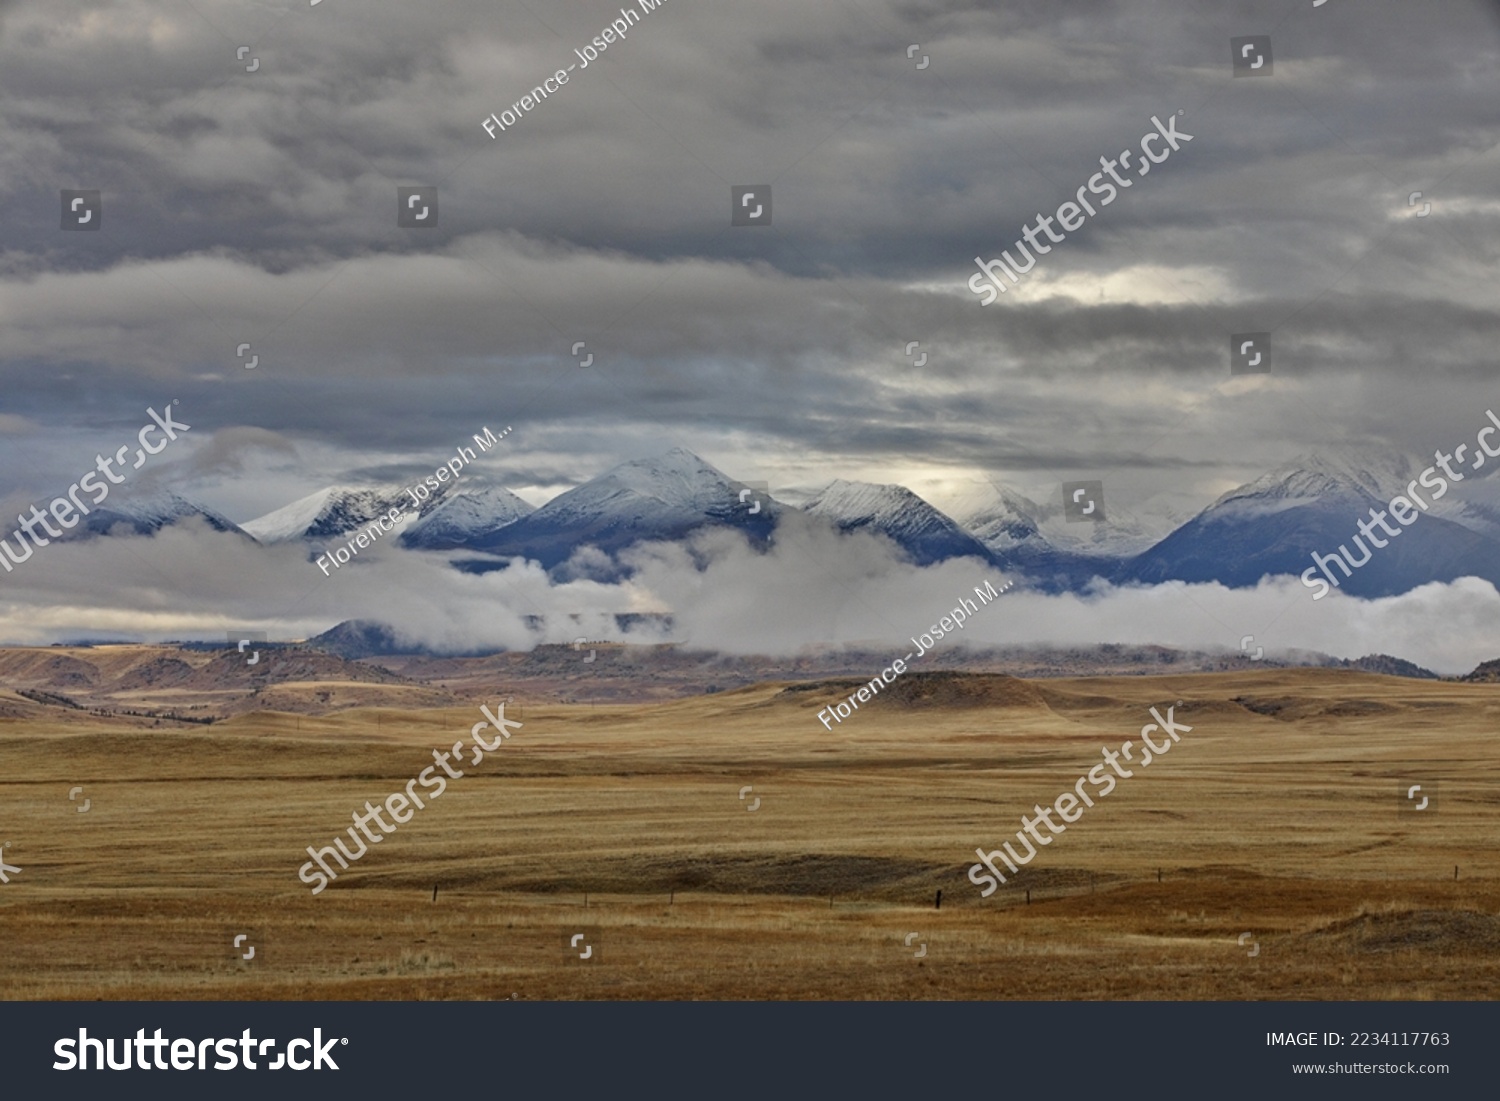 Beautiful scenery of distant mountains and wide prairie abound on Rt 191 near Big Timber, Montana, gateway to Absaroka-Beartooth Wilderness and adventure.   #2234117763